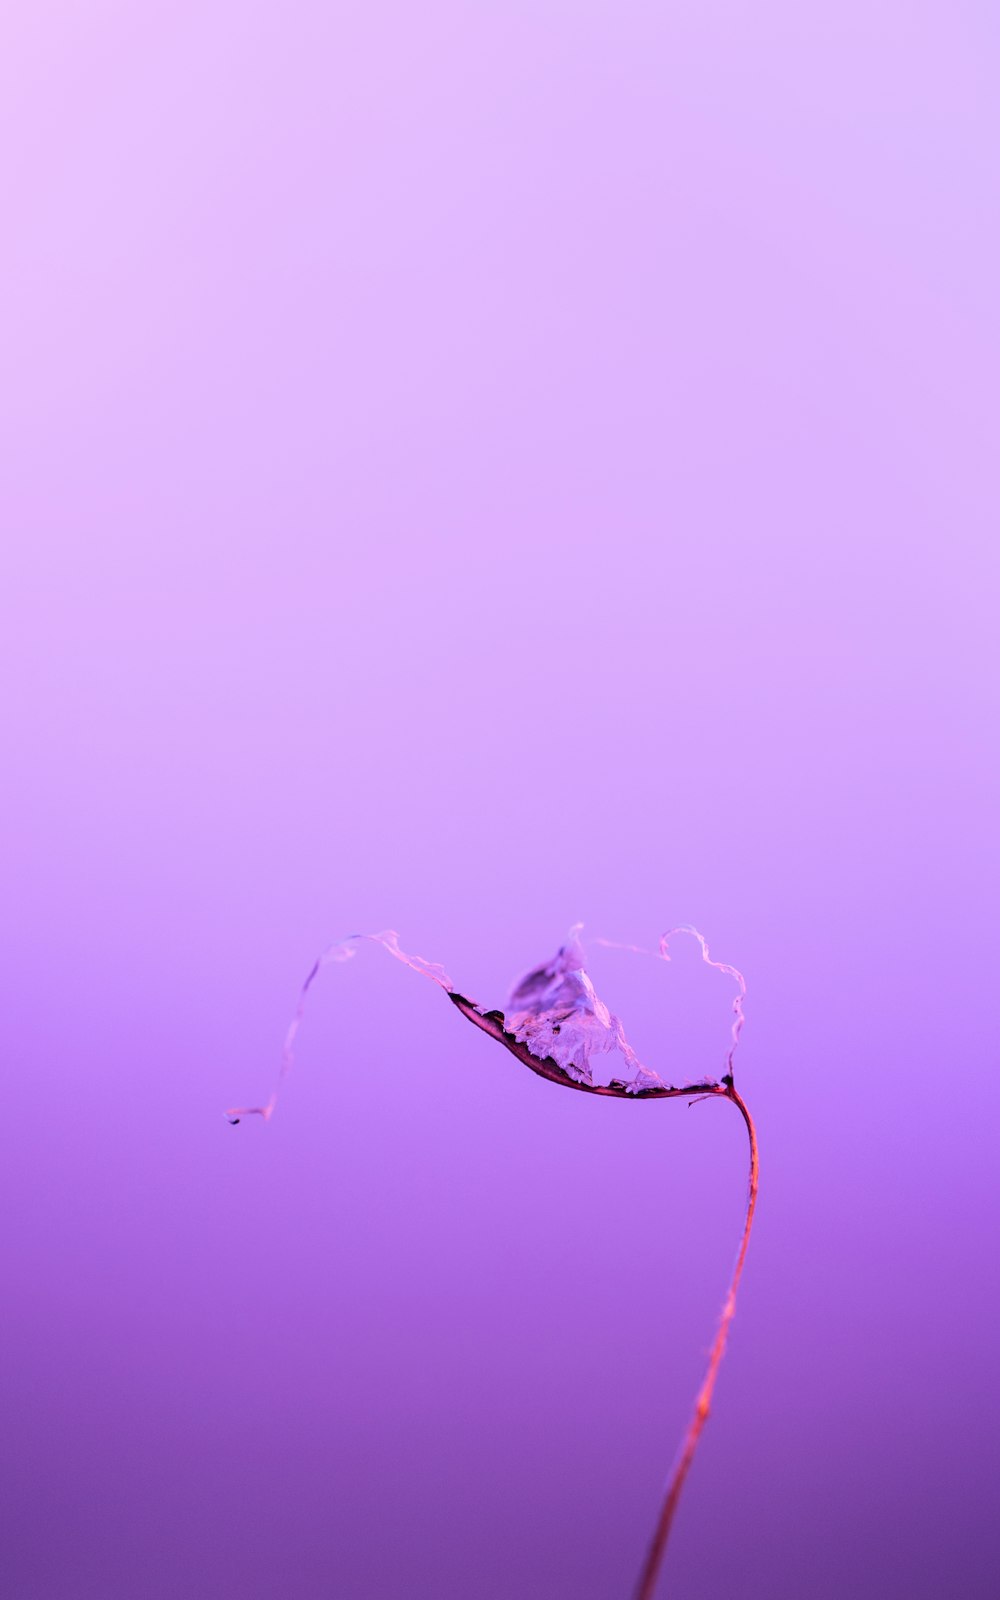 a single leaf floating in the air on a purple background